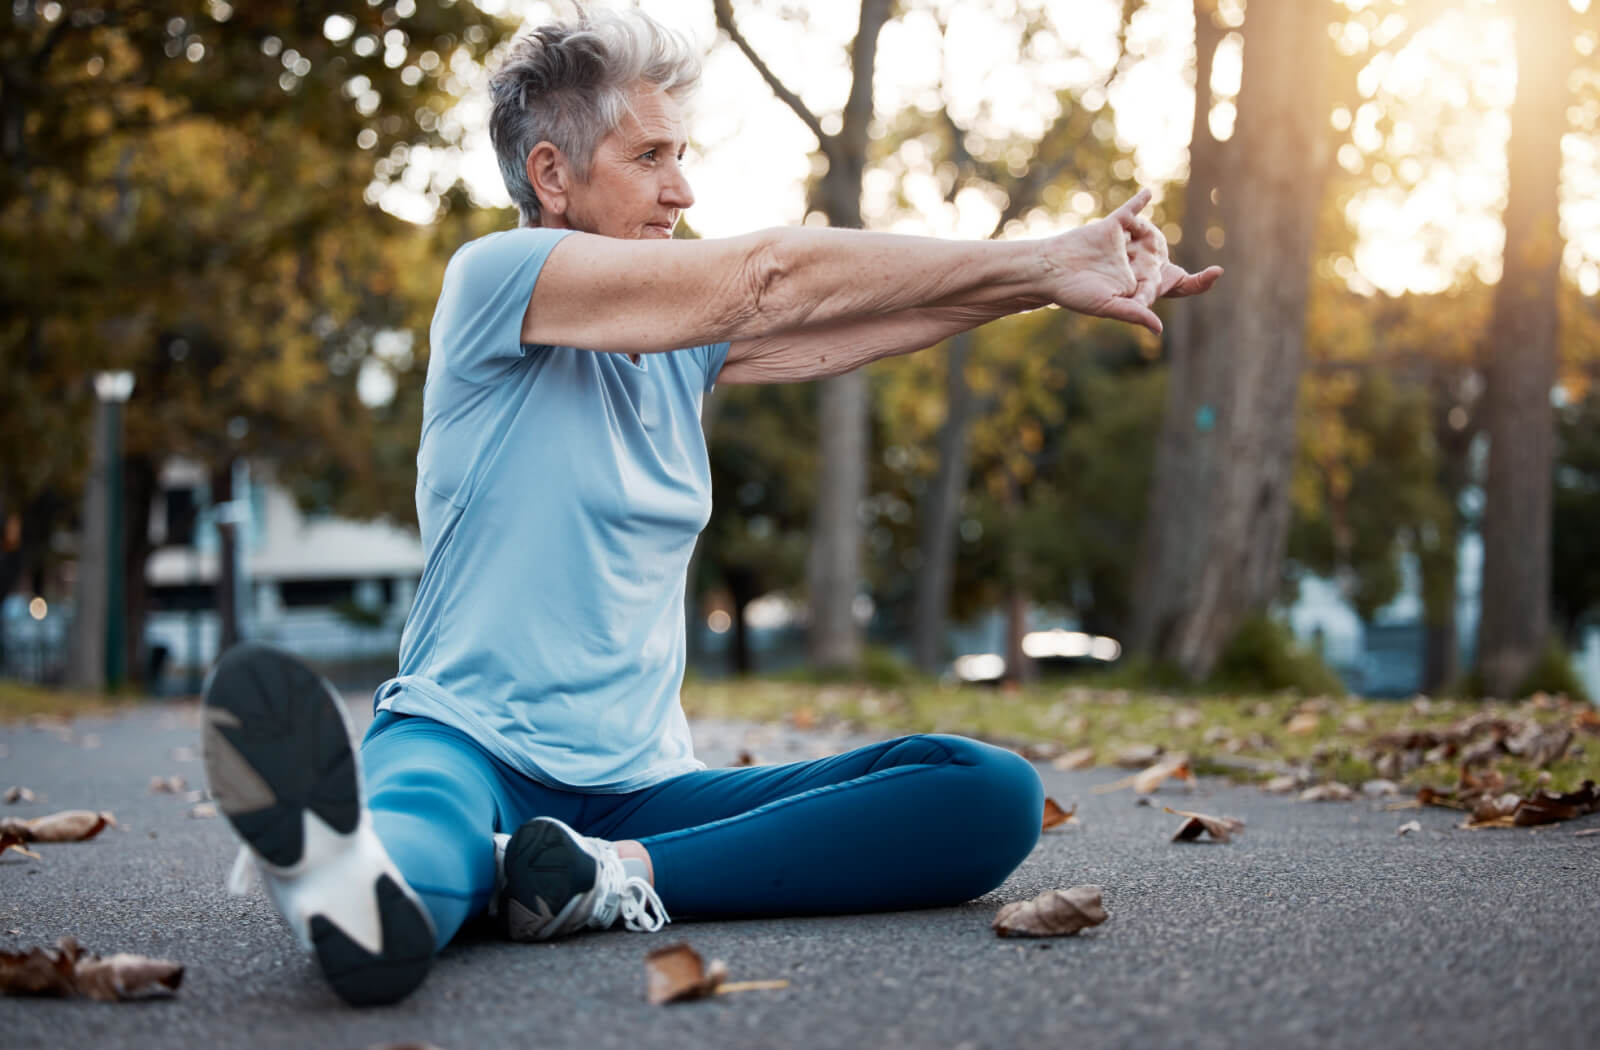 A senior woman in her sportswear stretching outdoors.
